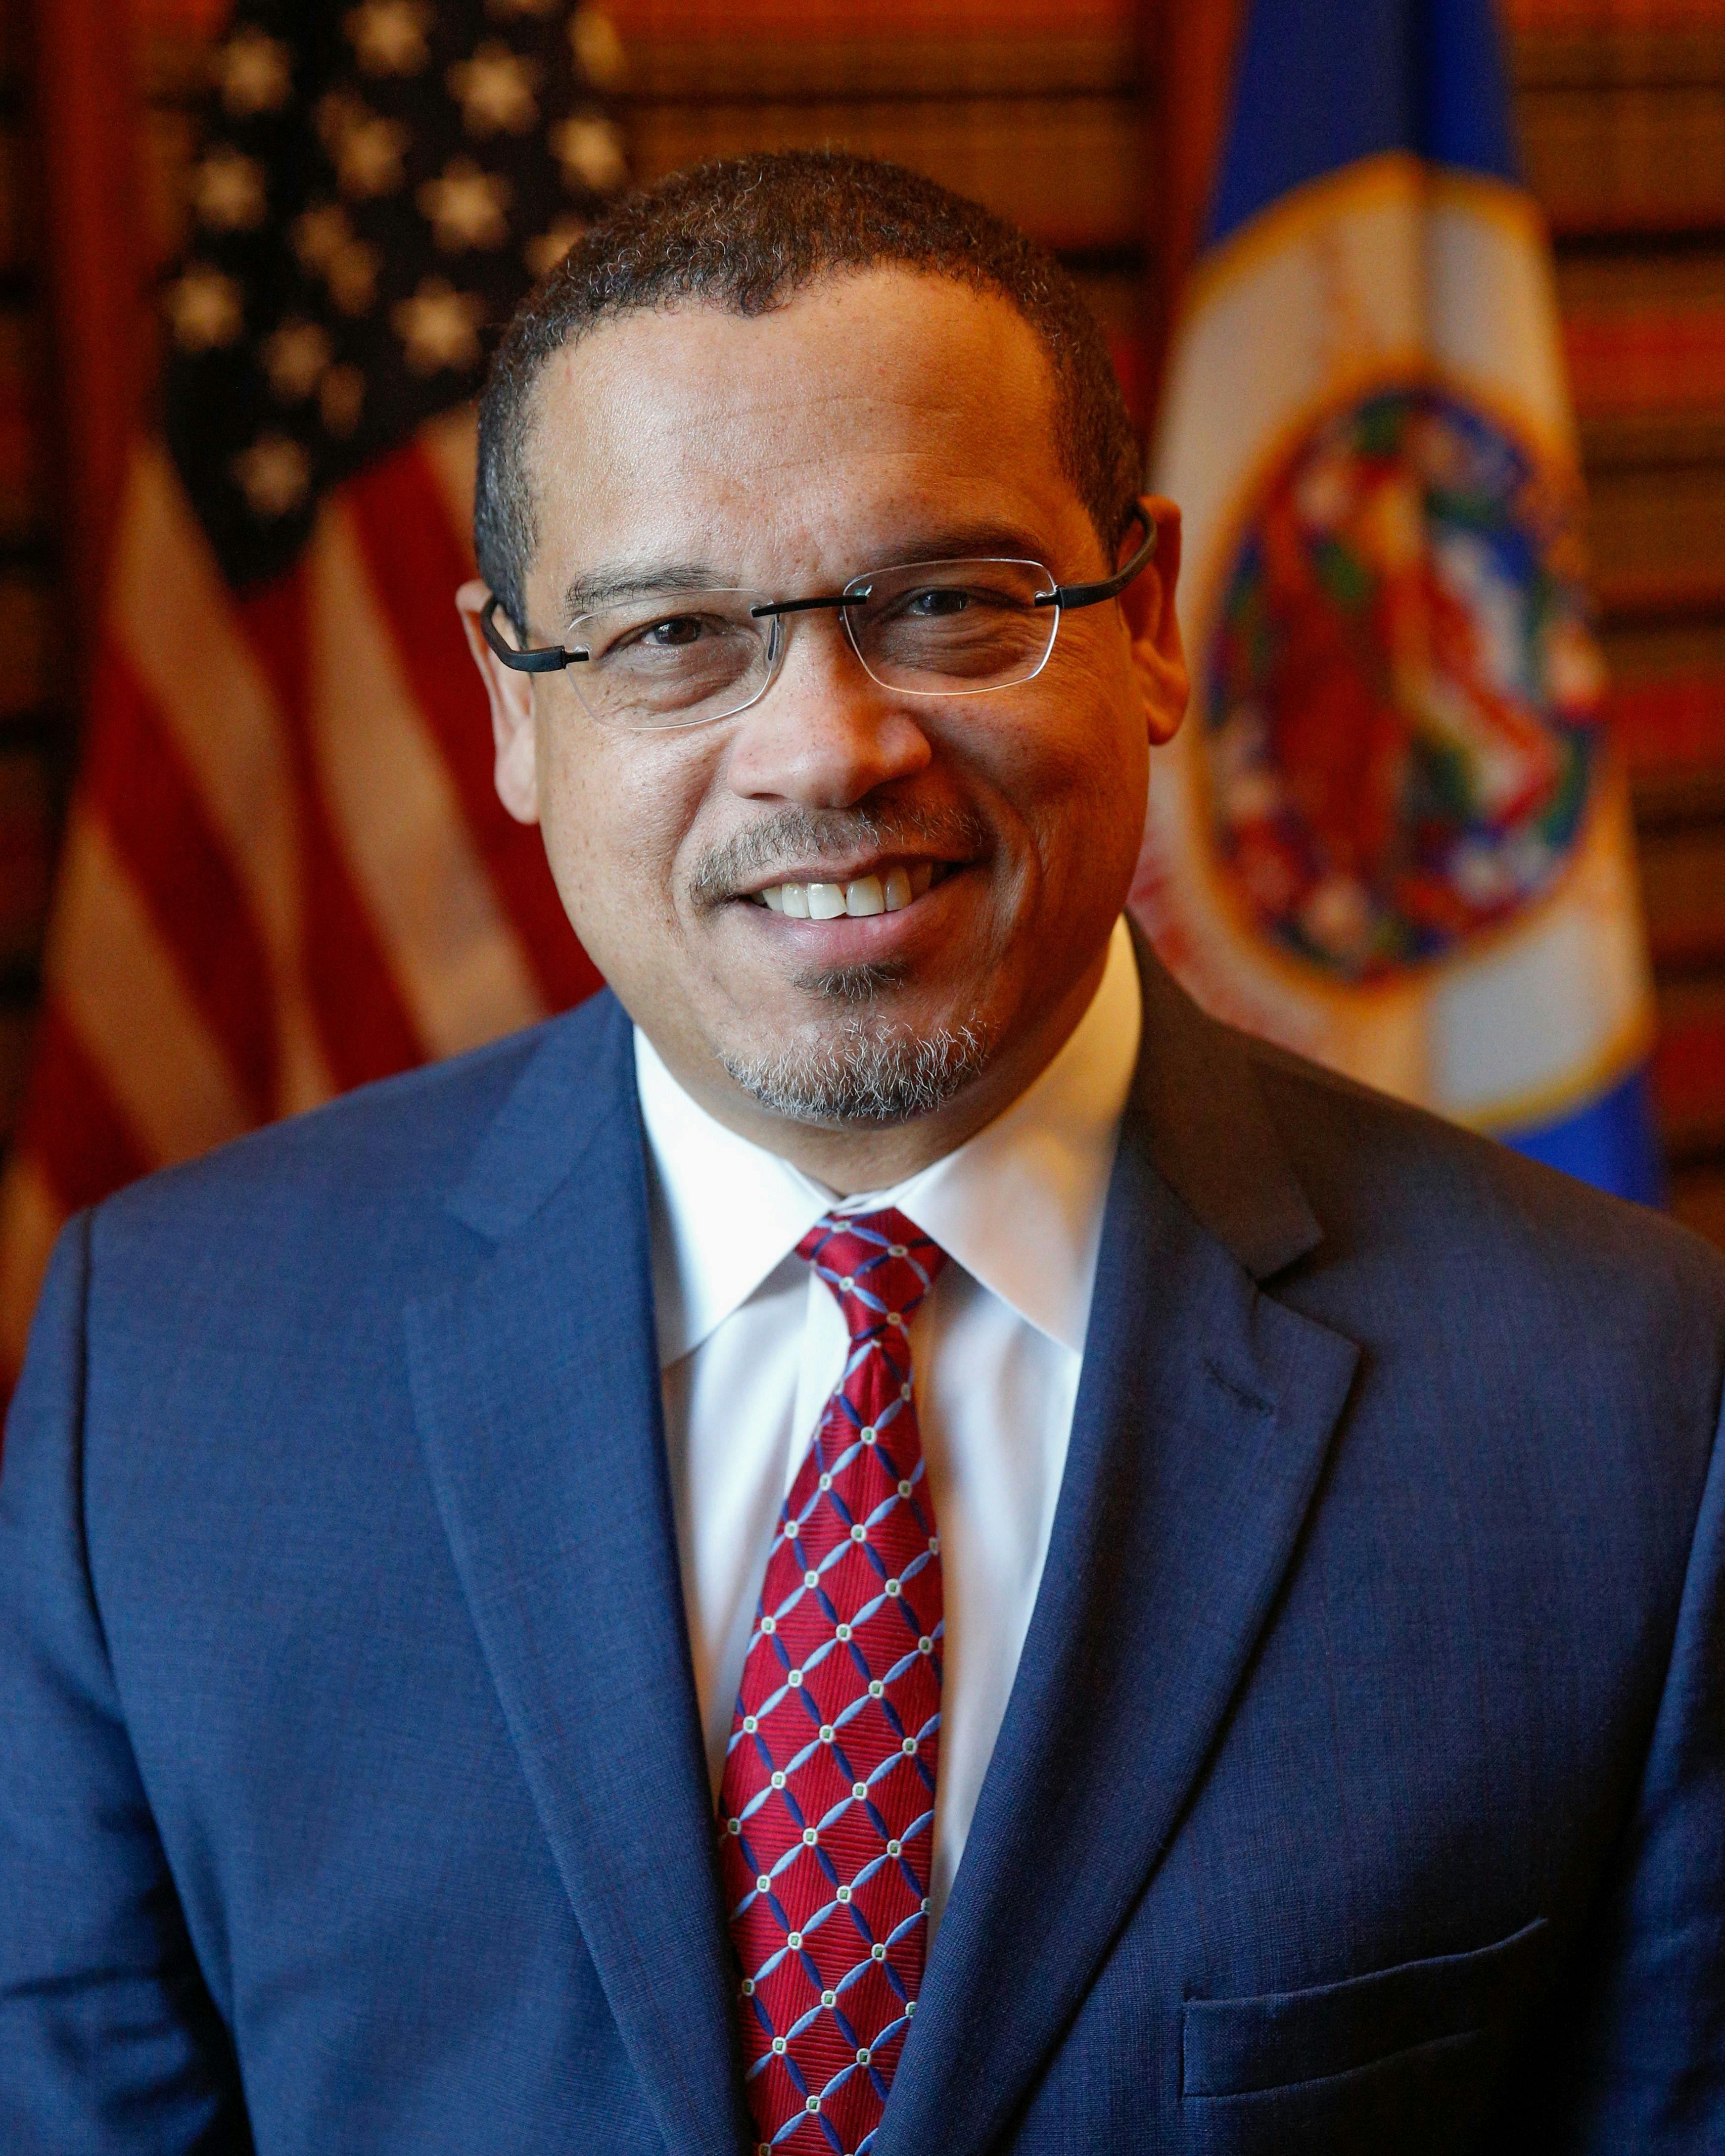 Minnesota Attorney General Keith Ellison says he plans to review two planned hospital mergers. (Photo: Minnesota attorney general's office)